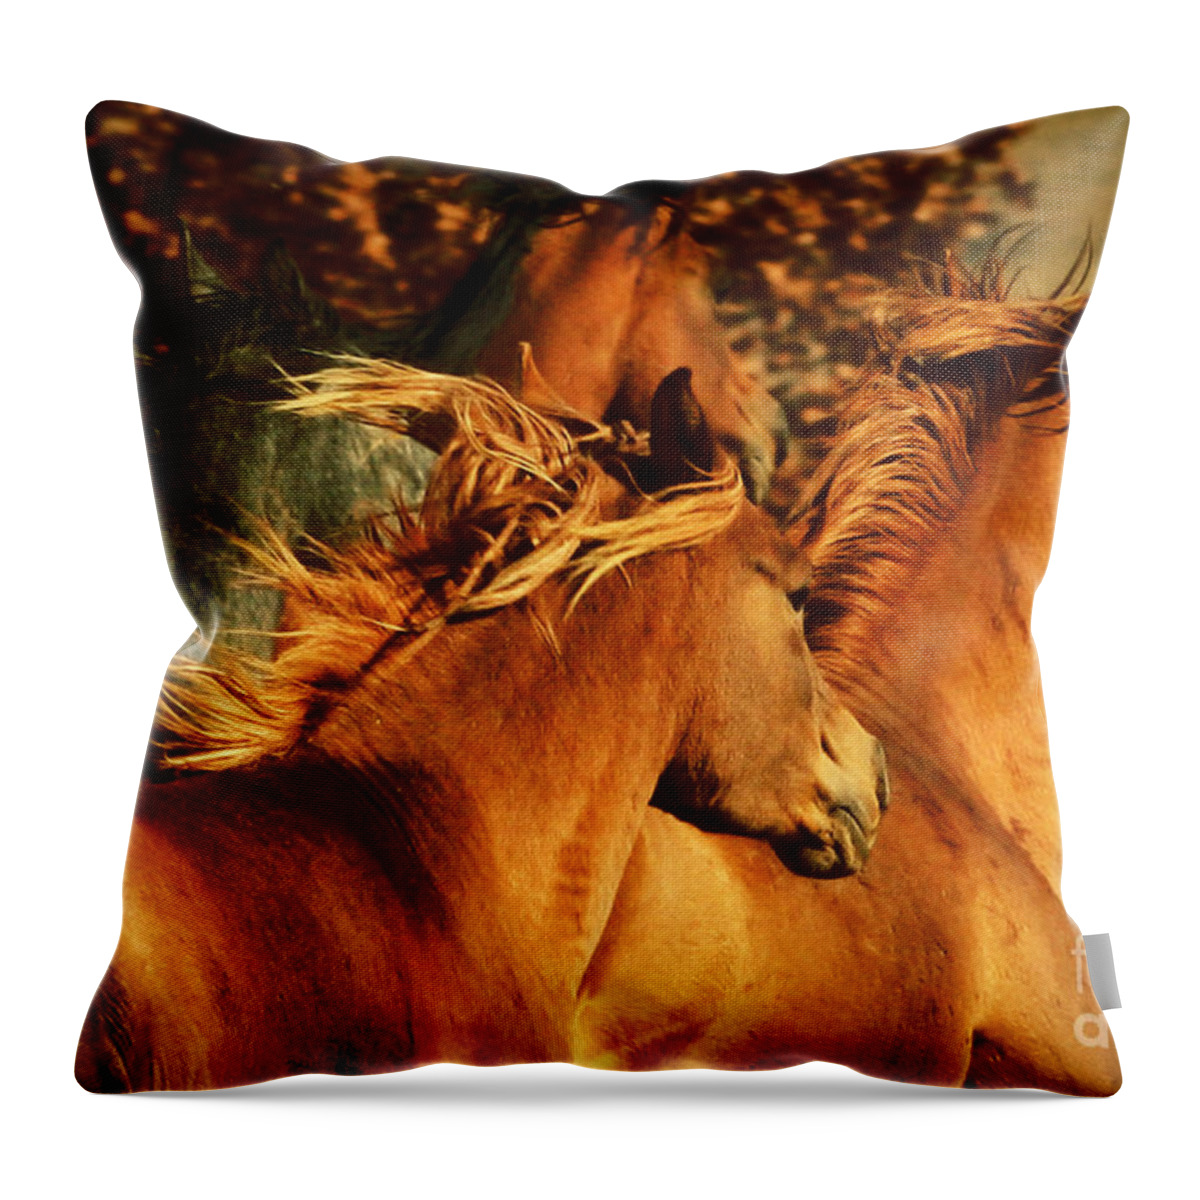 Horse Throw Pillow featuring the photograph Wild Horses by Dimitar Hristov